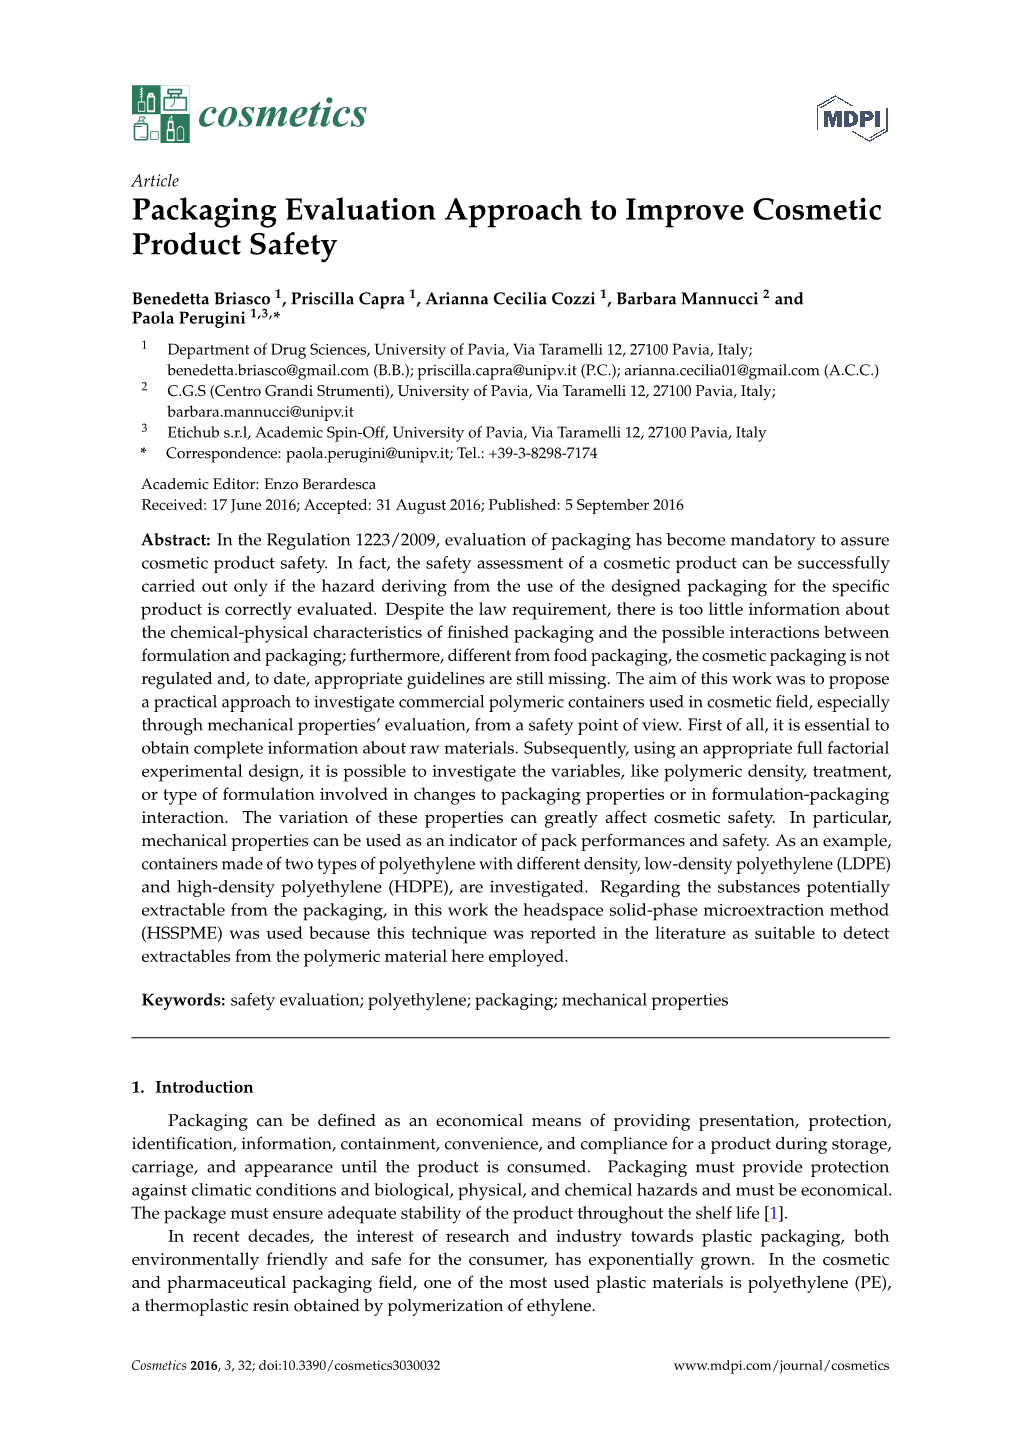 Packaging Evaluation Approach to Improve Cosmetic Product Safety